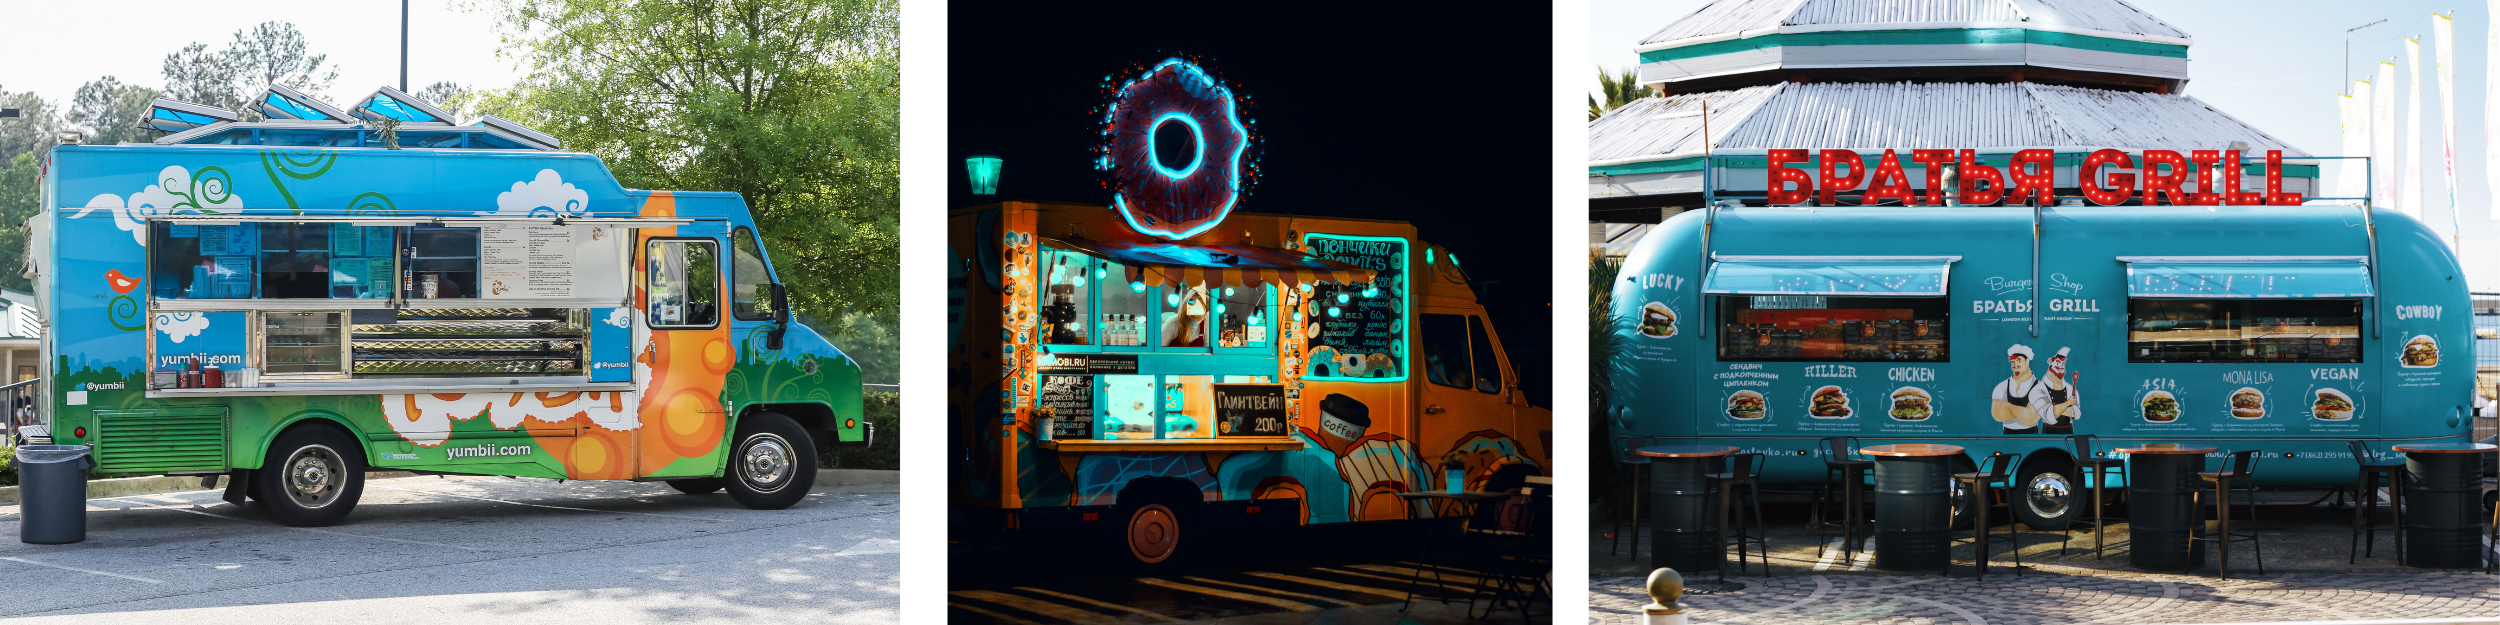 Food truck front